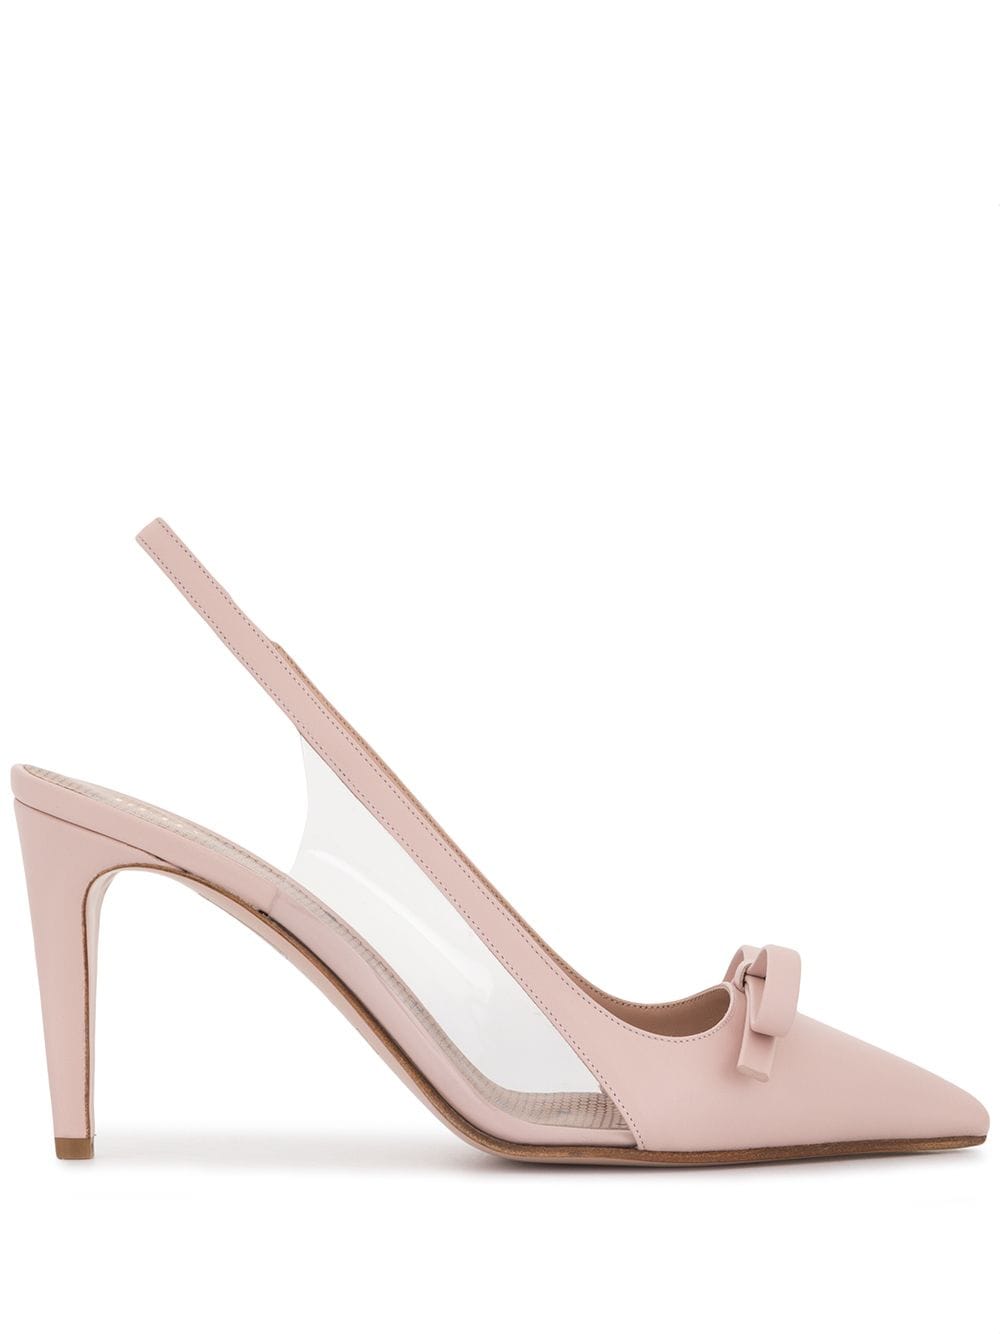 RED VALENTINO BOW DETAIL PUMPS